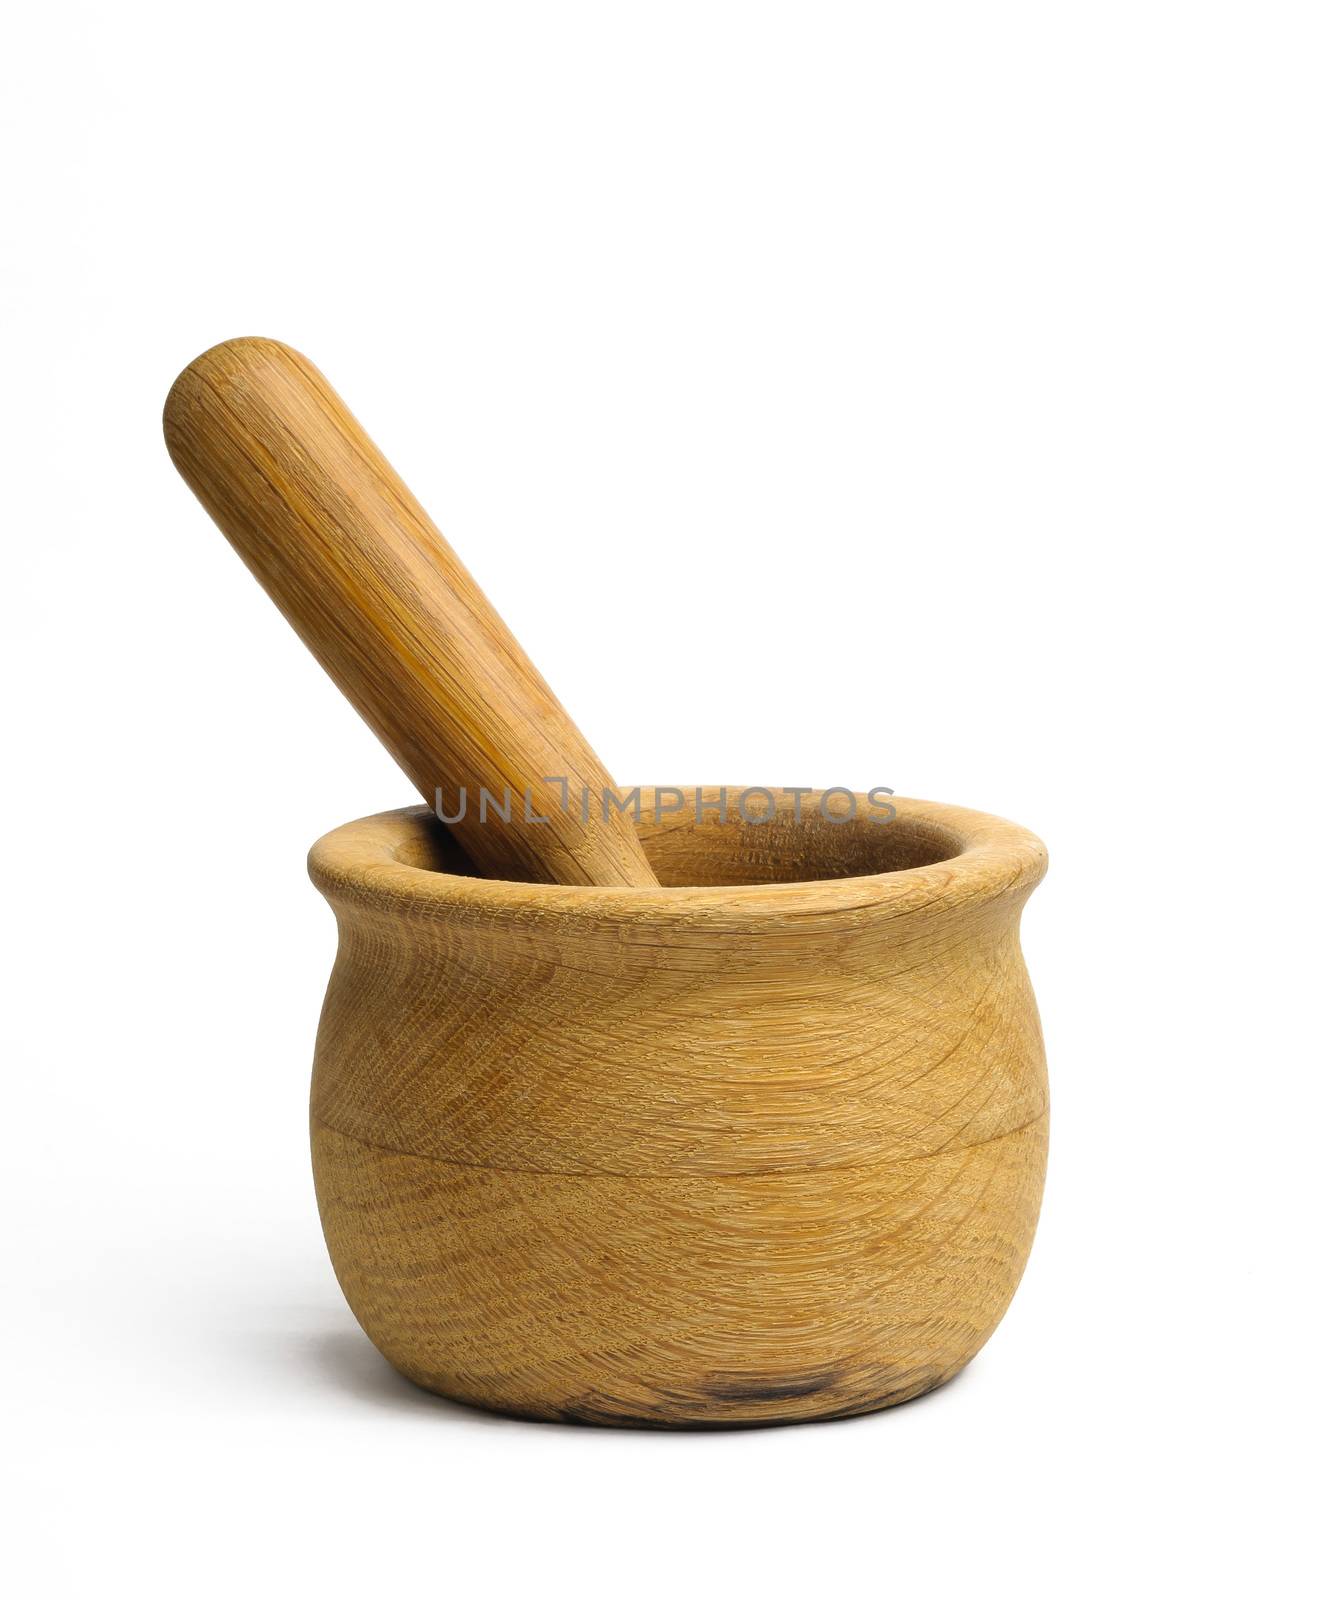 Olive wood mortar and pestle on white background